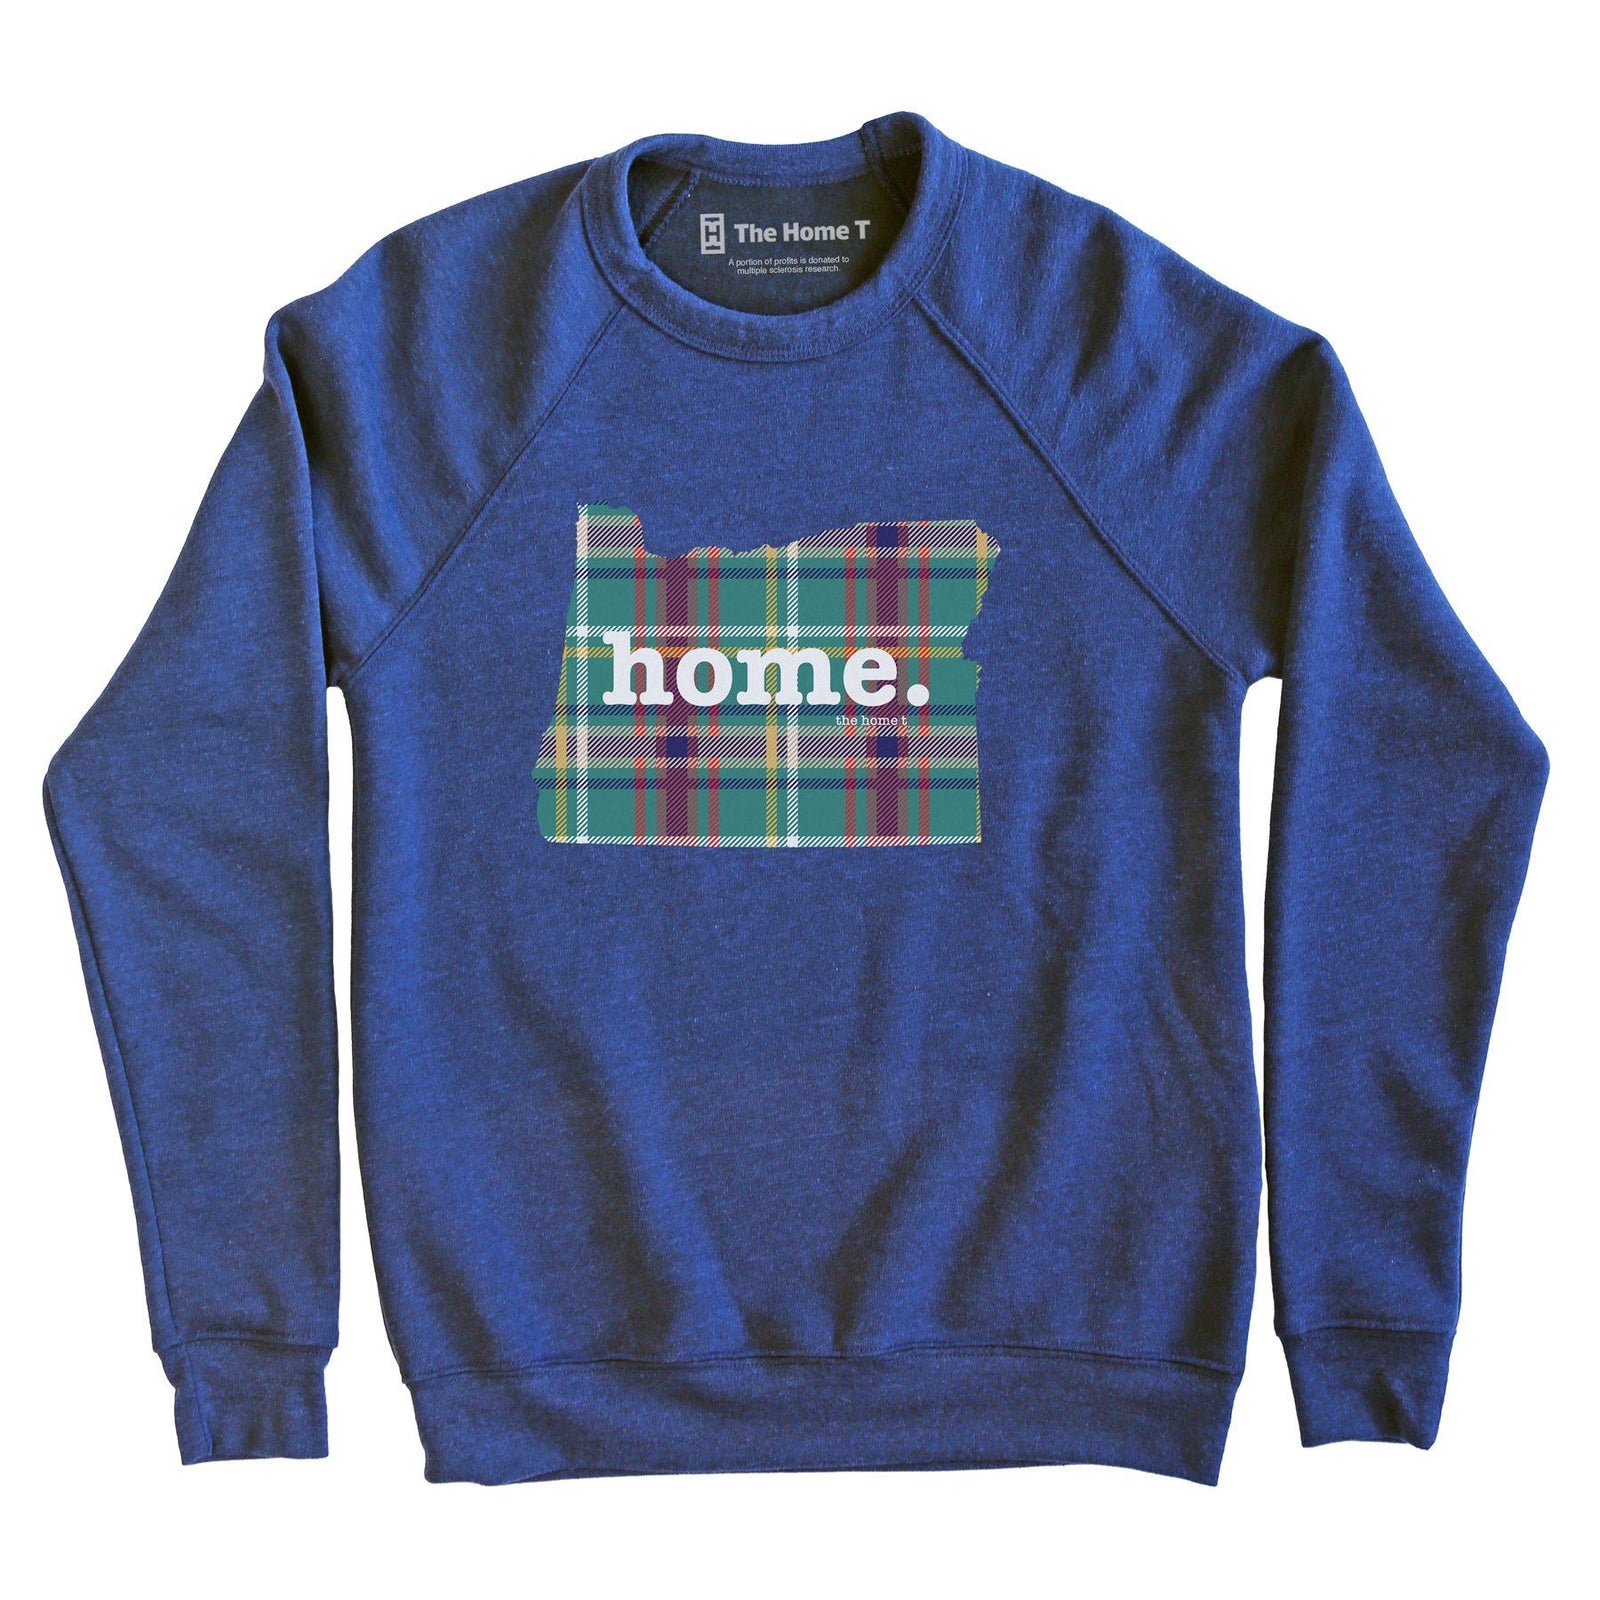 Oregon Clothing and Apparel The Home T